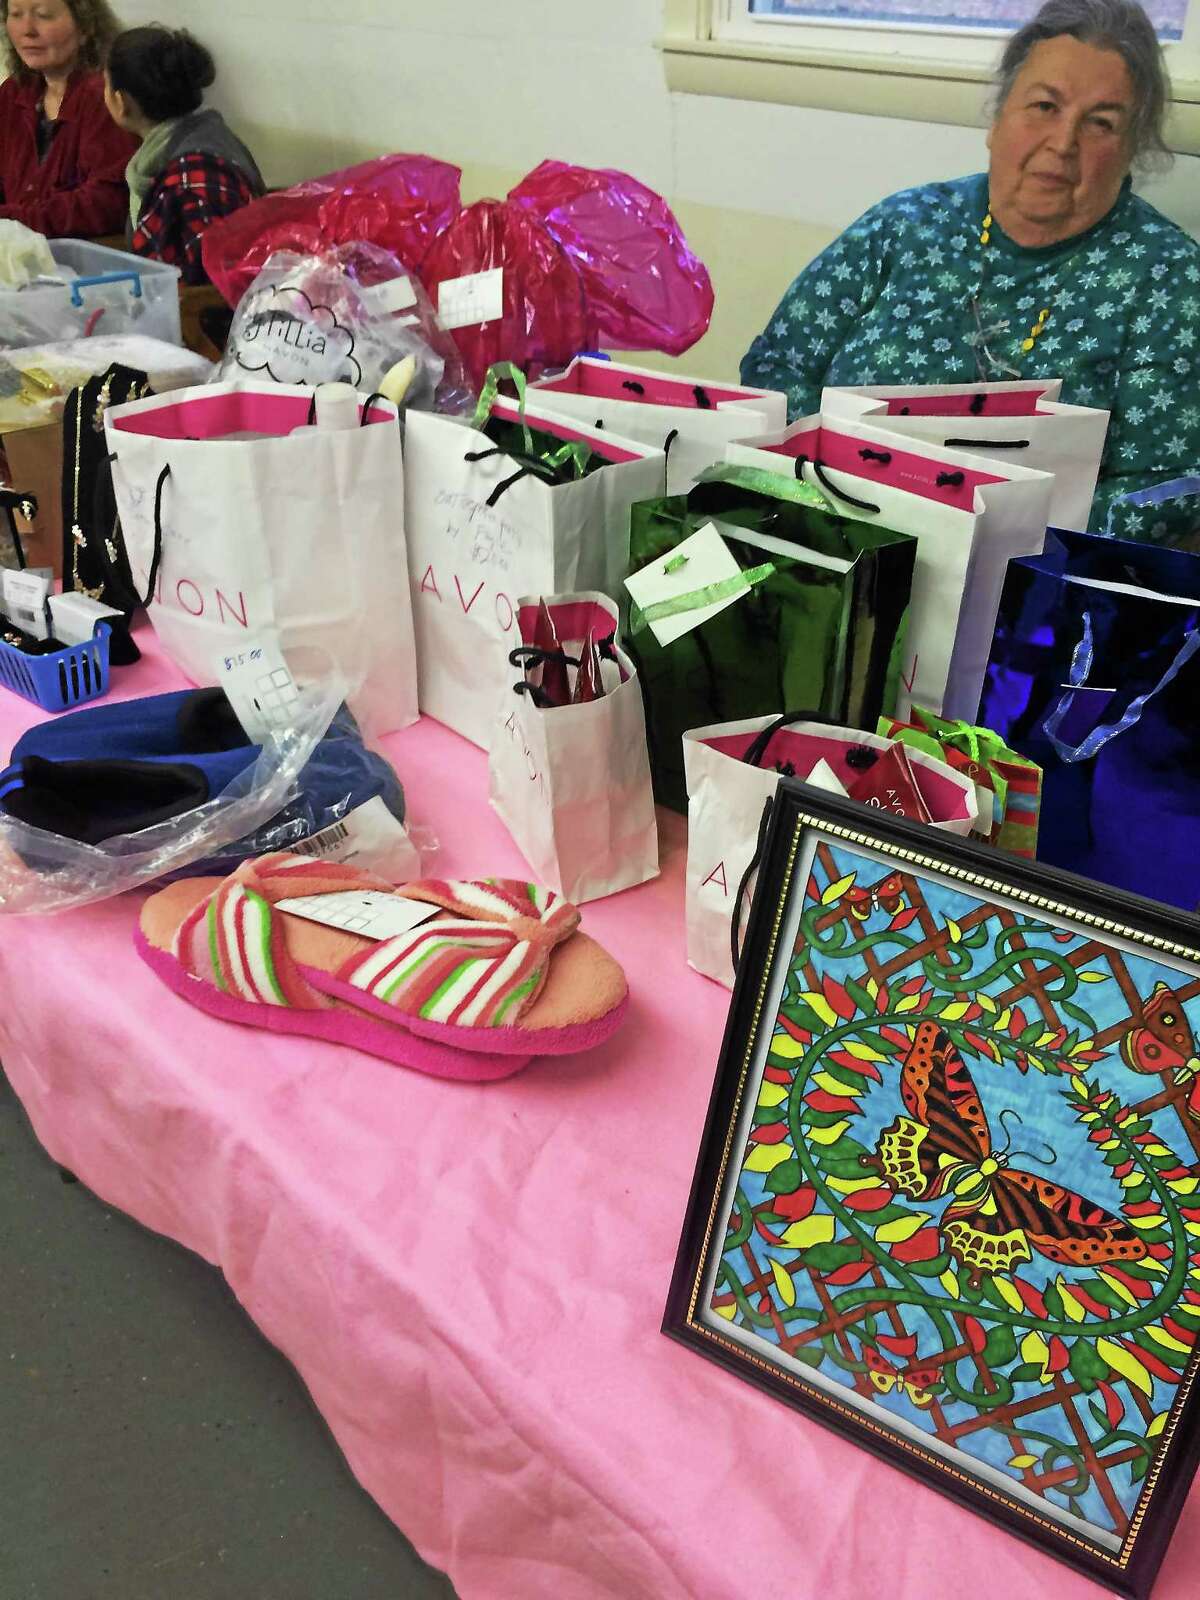 Avon products were part of the shopping experience at the Christmas Bazaar in the Northfield section of Litchfield